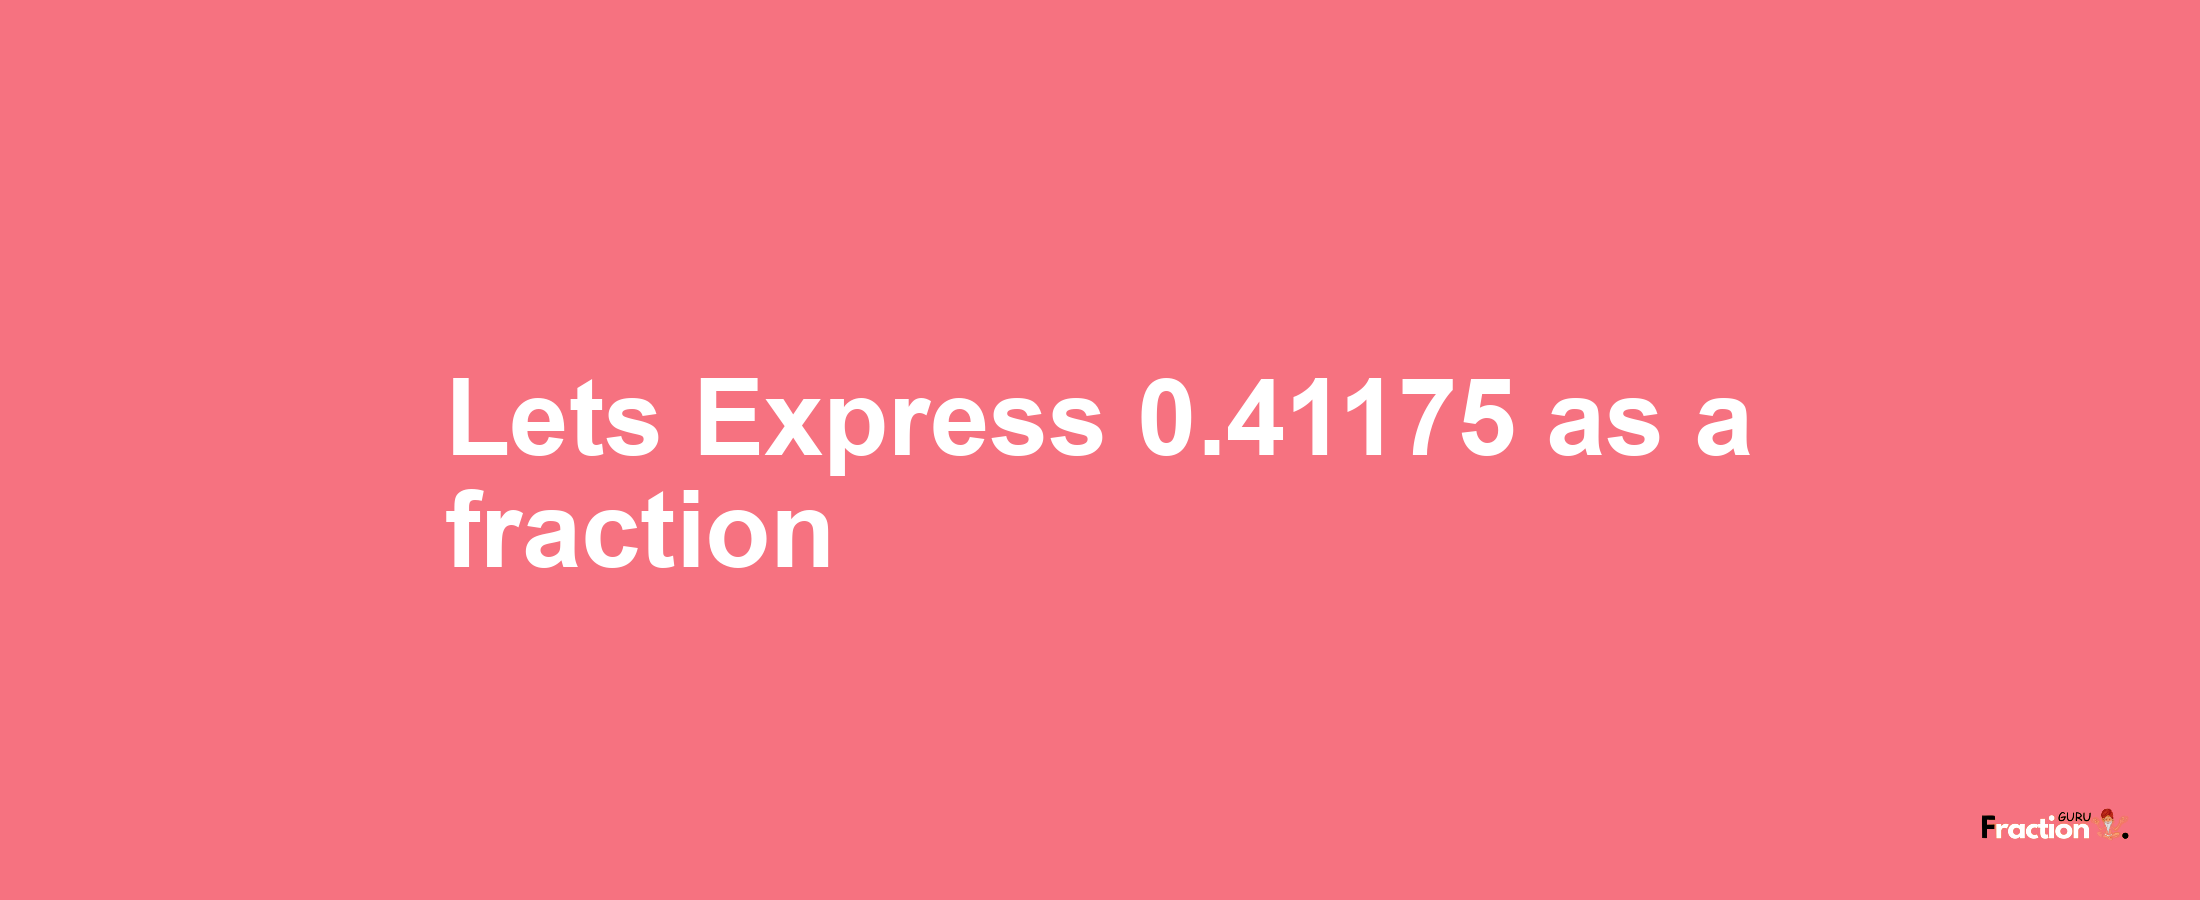 Lets Express 0.41175 as afraction